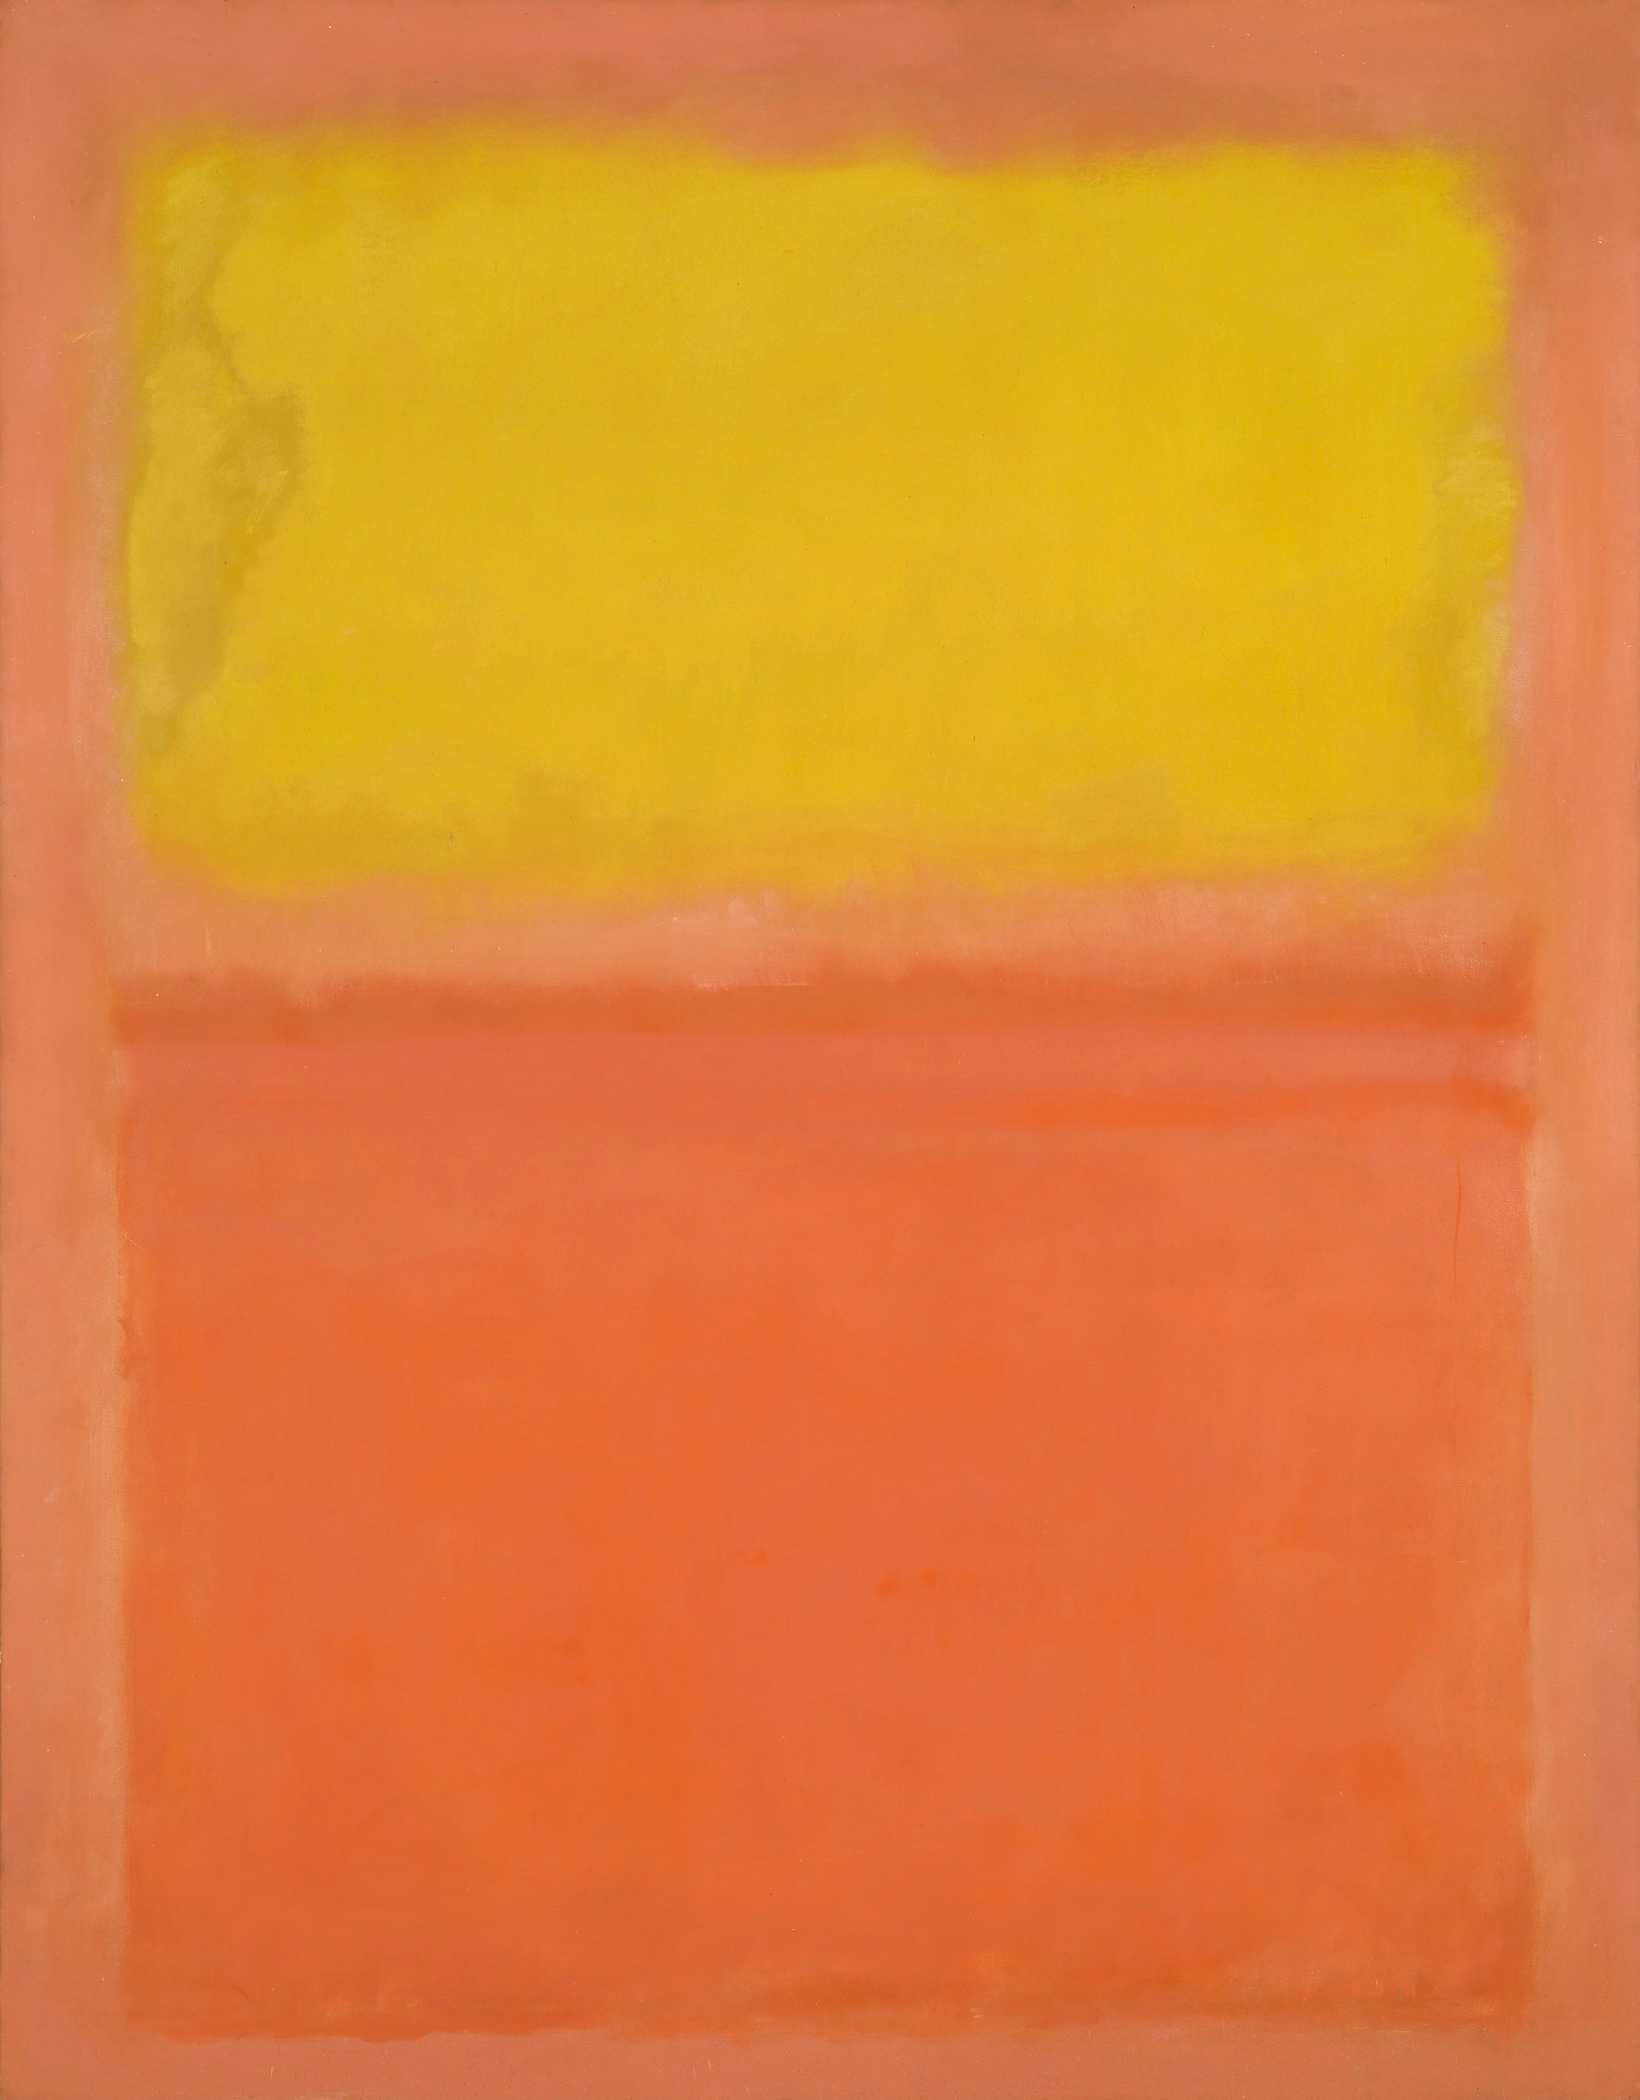 Find out more about Mark Rothko - Orange and Yellow